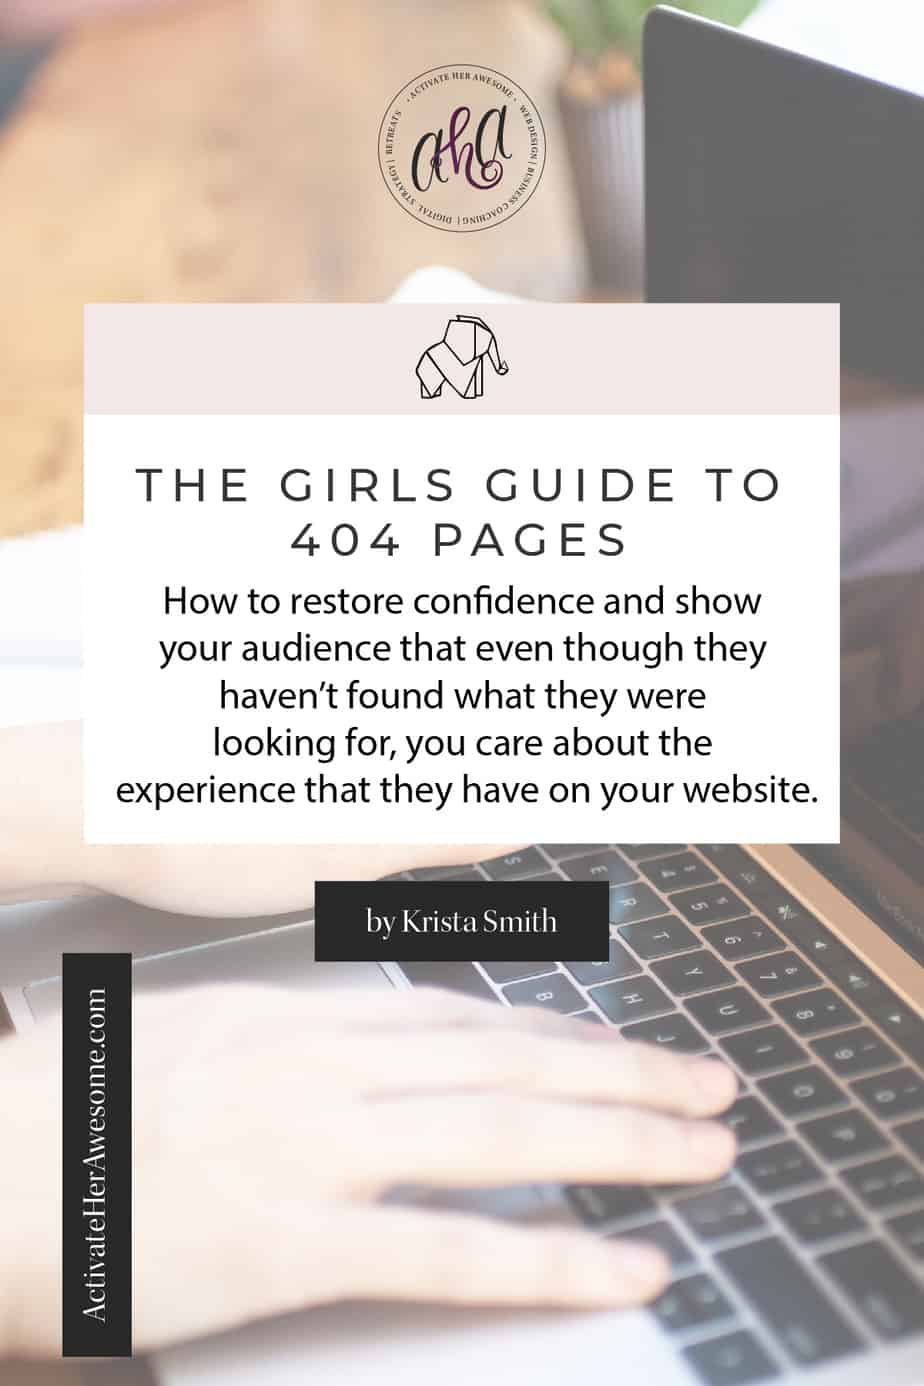 The Girls Guide to 404 Pages by Krista Smith, ActivateHerAwesome.com | It happens, ladies. We redesign our websites. We direct traffic from one URL to another. Inevitably, a visitor will stumble onto a 404 error page. In this post discover what a 404 page is, why you need one, and how you use yours to restore confidence and show your audience that even though they haven’t found what they were looking for, you care about the experience that they have on your website.